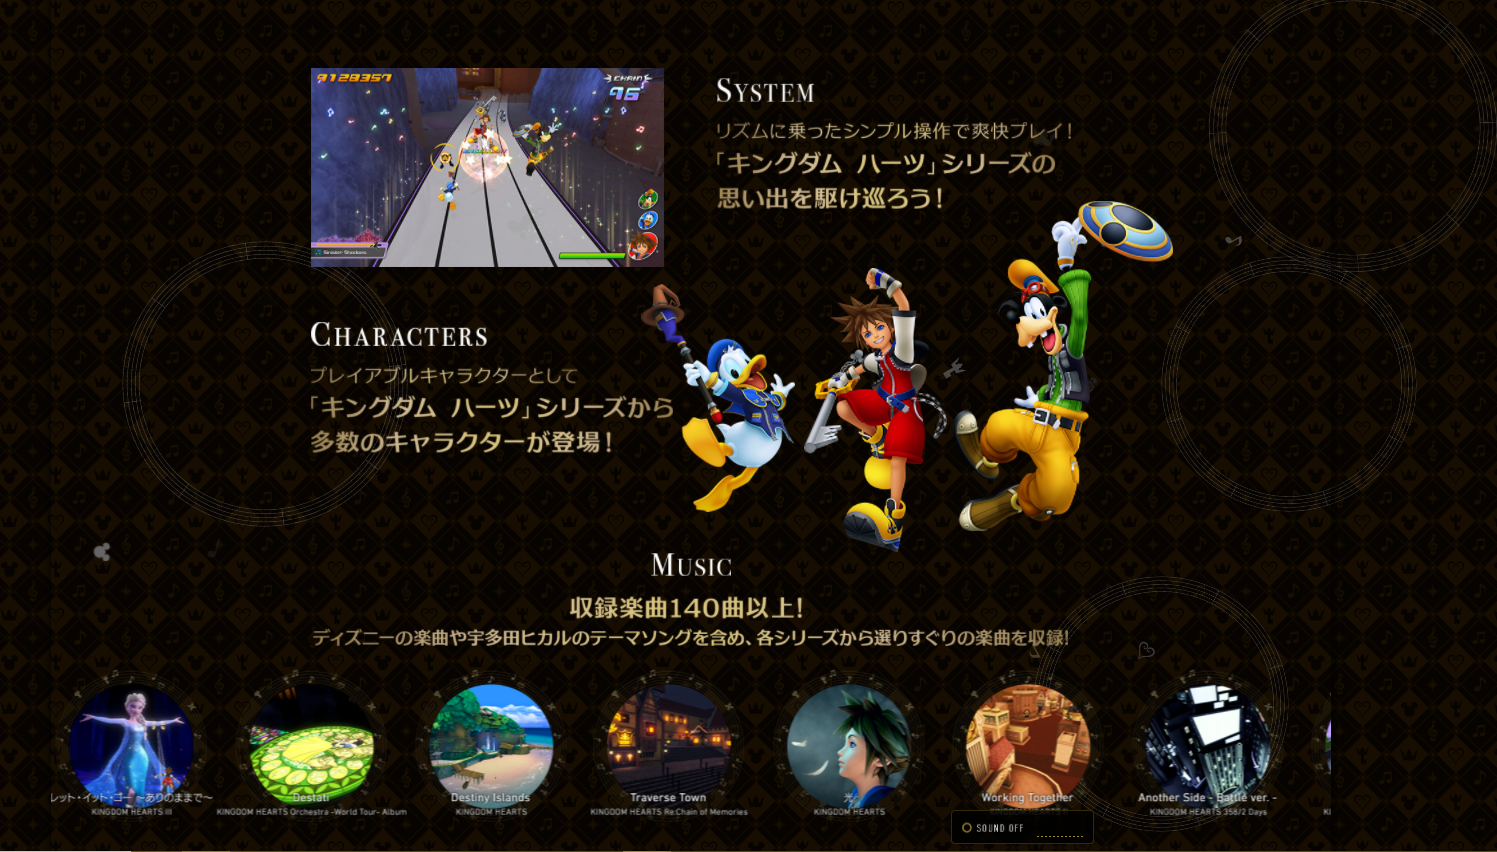 Updated Kingdom Hearts Japanese Melody Of Memory Website Updated New Screenshots Confirmed Music Tracks Playstation 4 Theme And More Kingdom Hearts News Kh13 For Kingdom Hearts